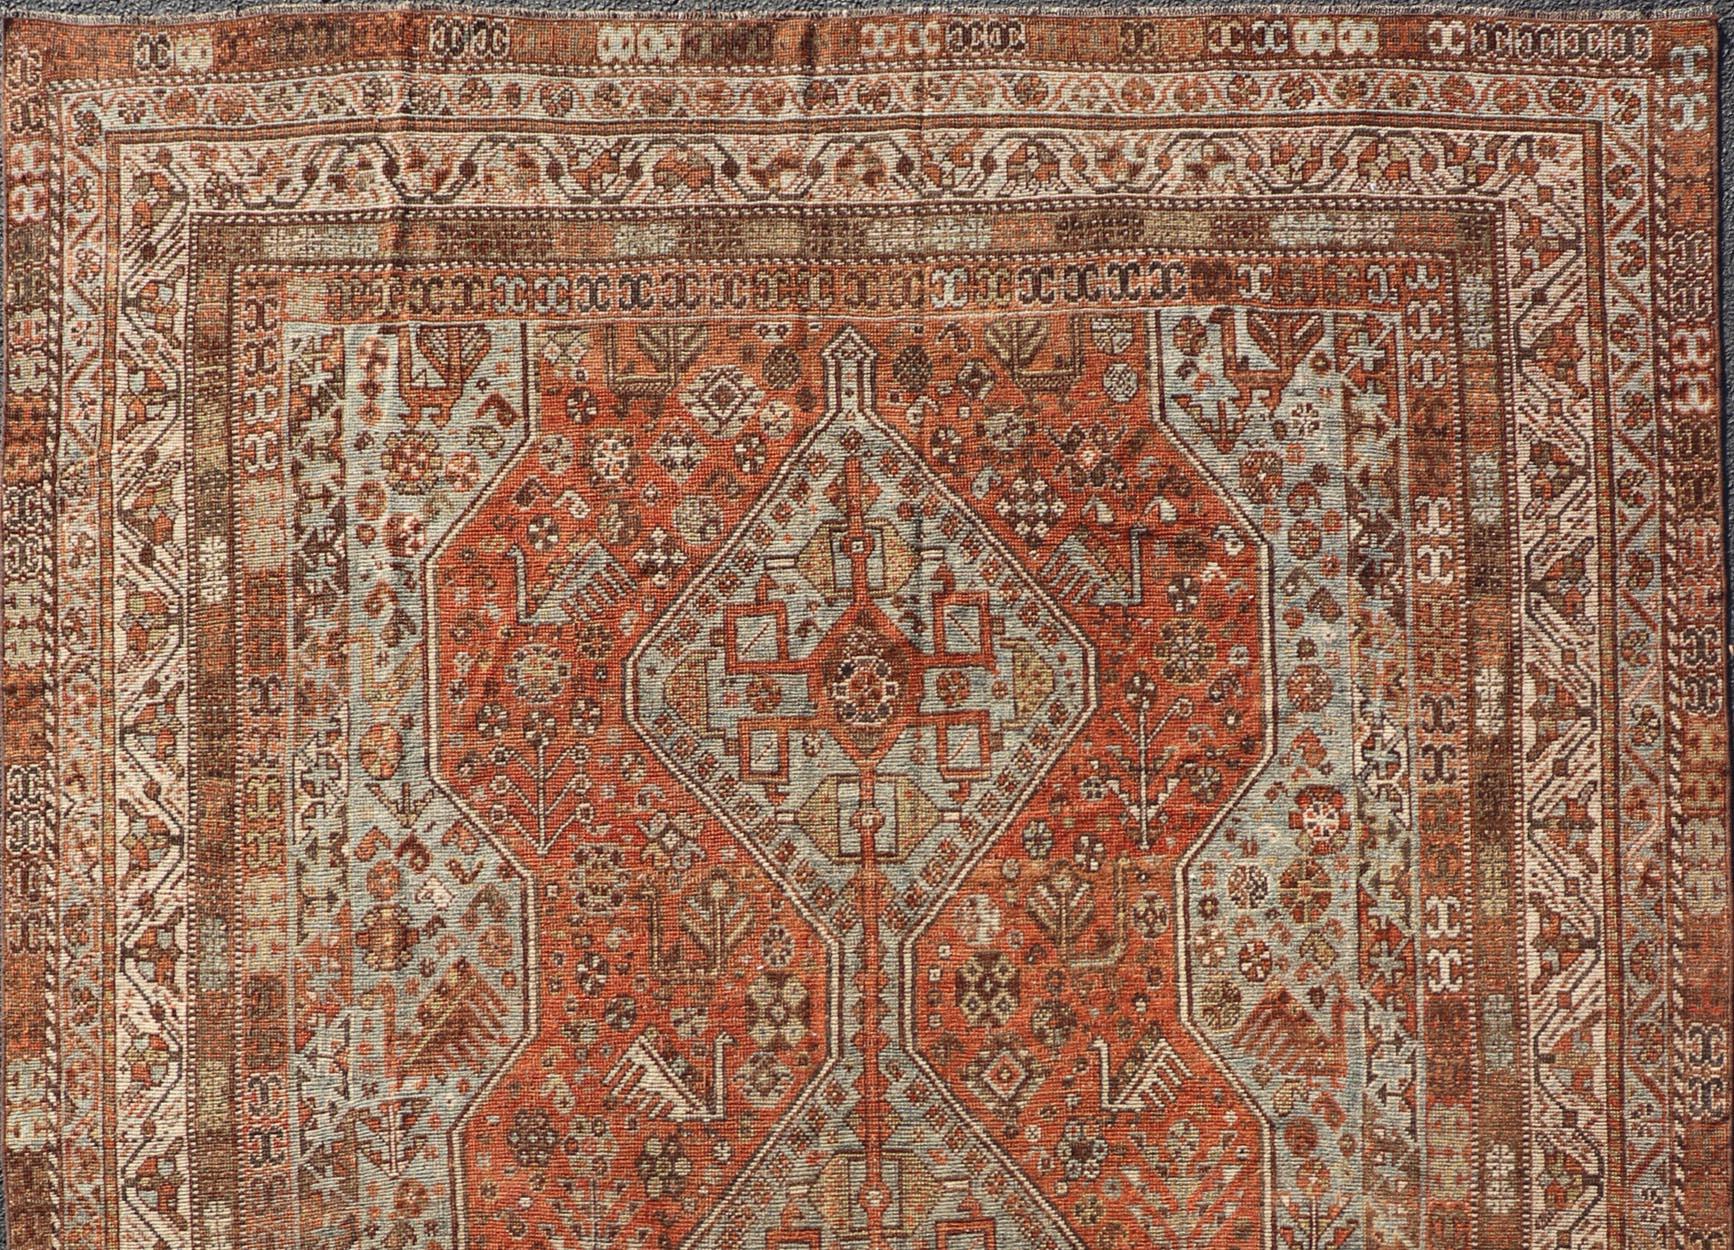 Antique Persian Shiraz Rug With Medallions Geometric in Rusty Orange, Steel Blue In Good Condition For Sale In Atlanta, GA